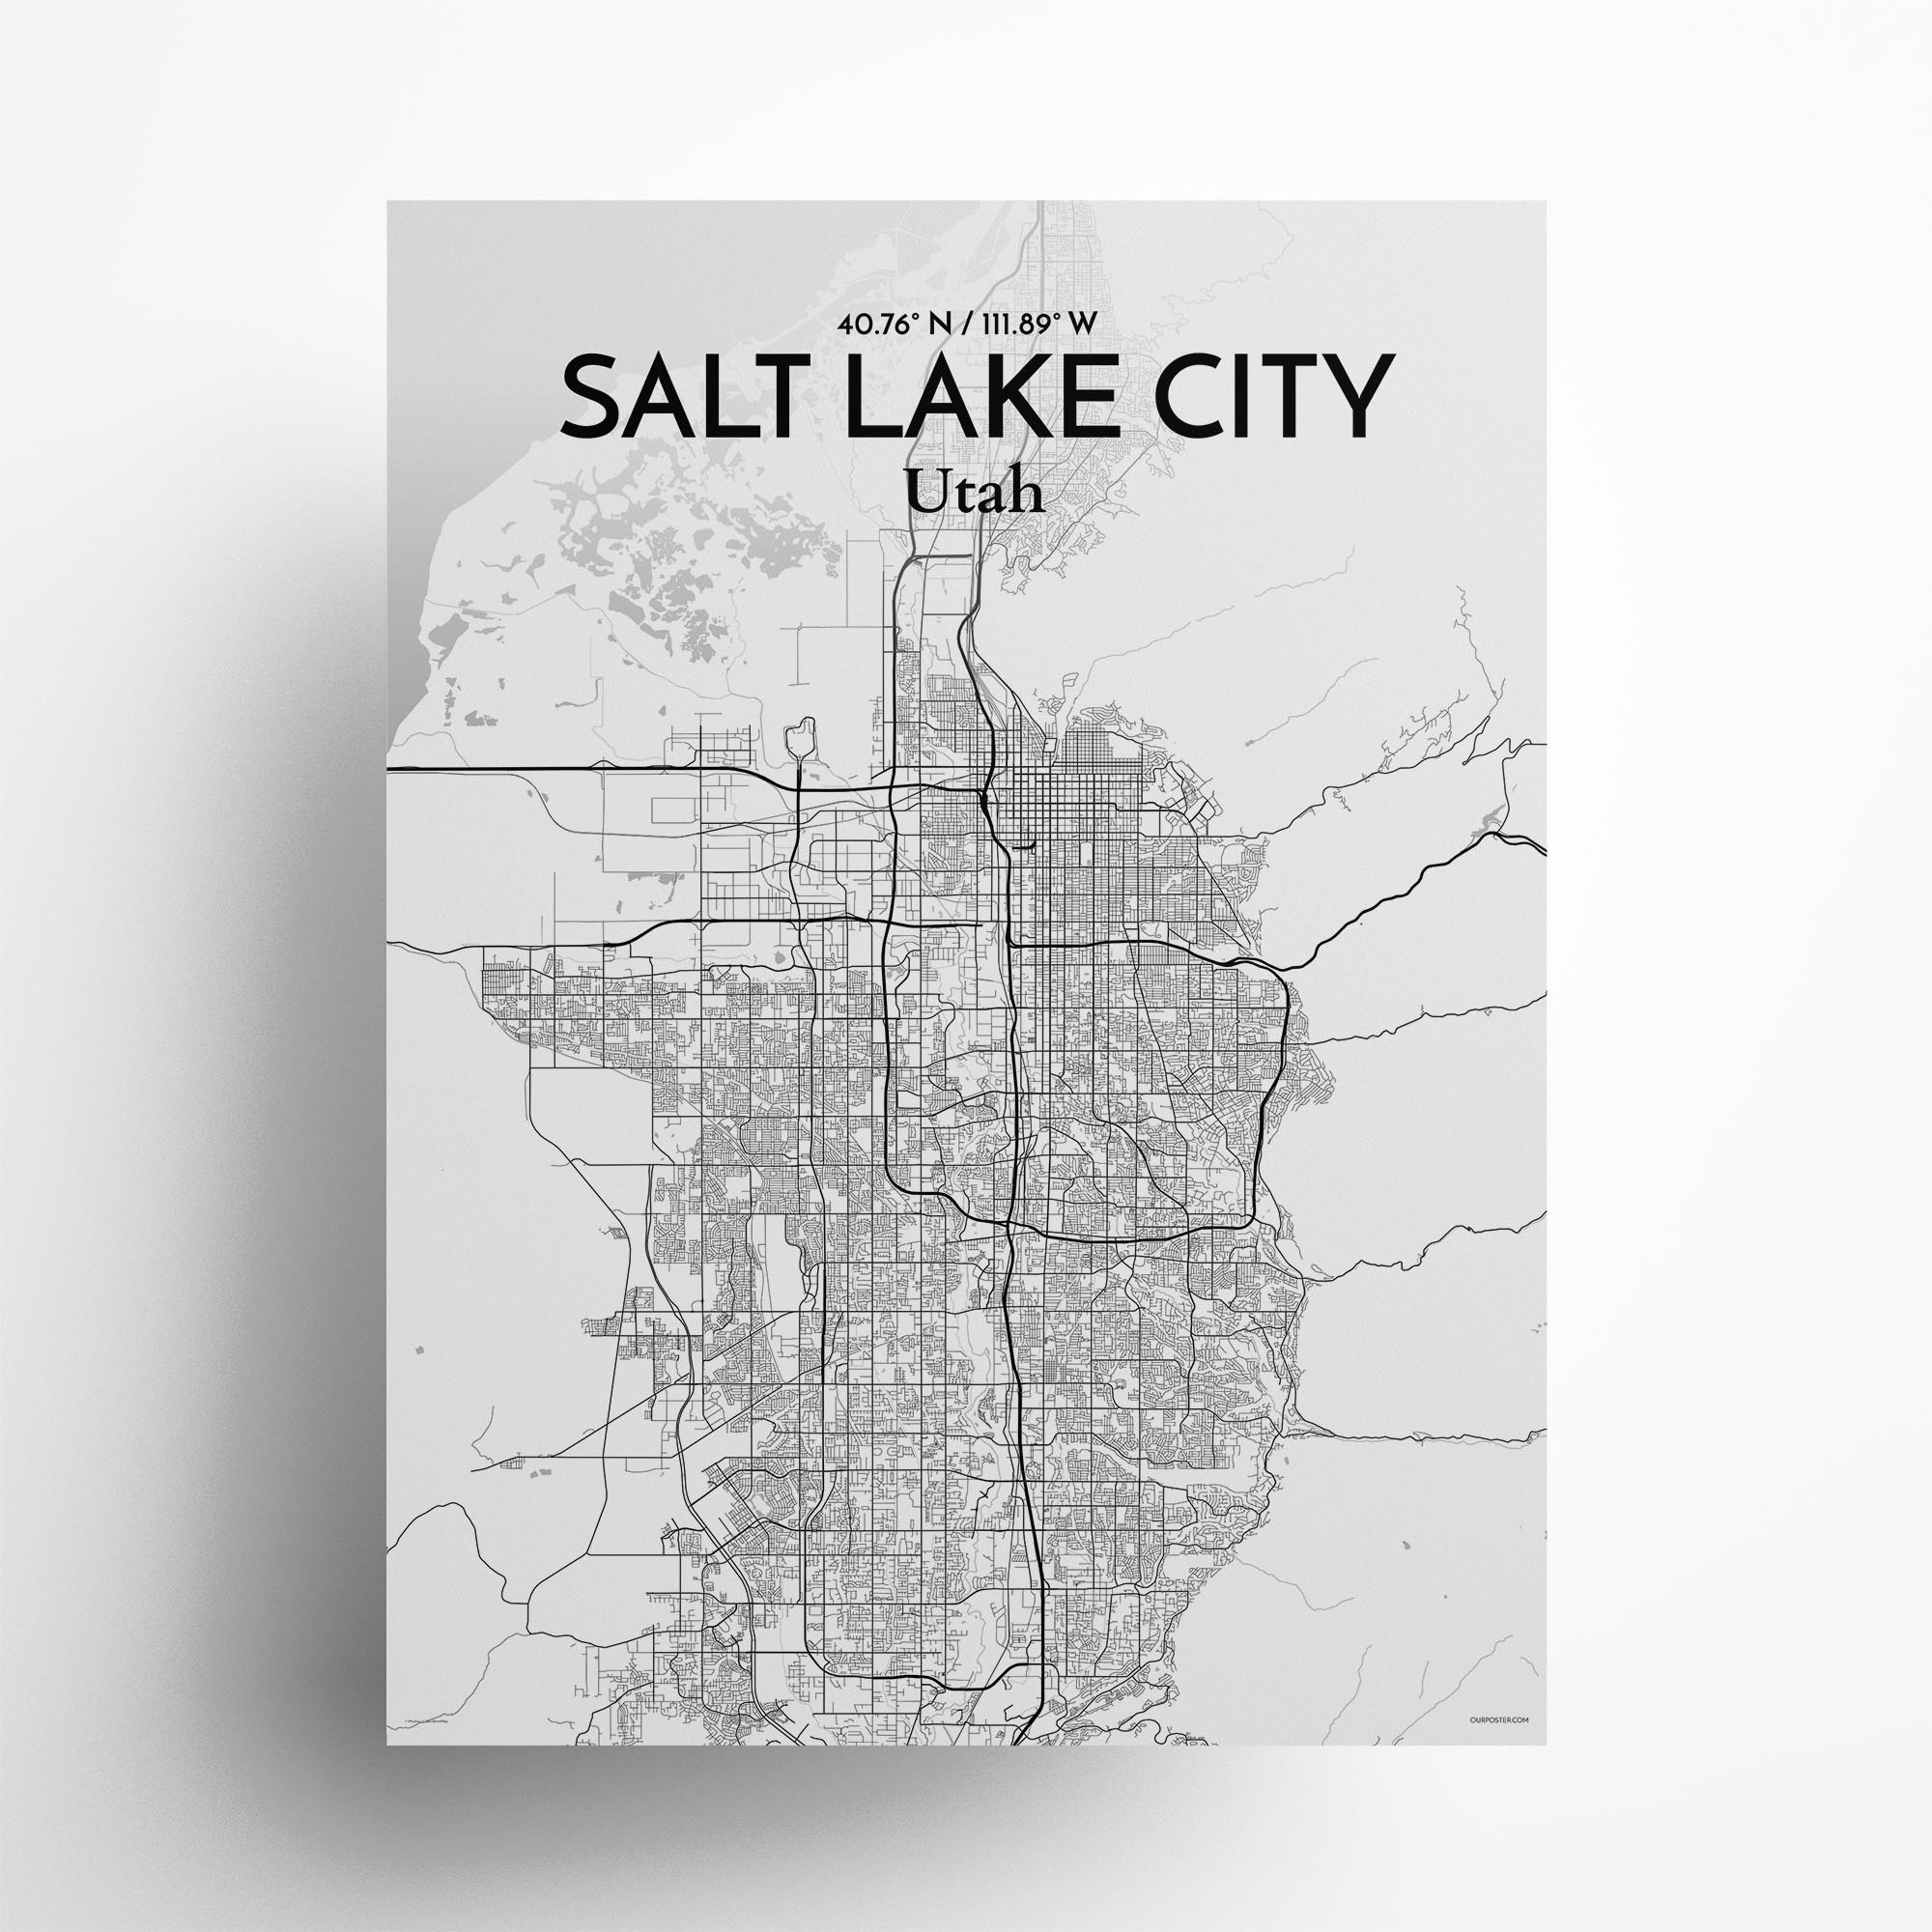 Salt Lake City city map poster in Tones of size 18" x 24"